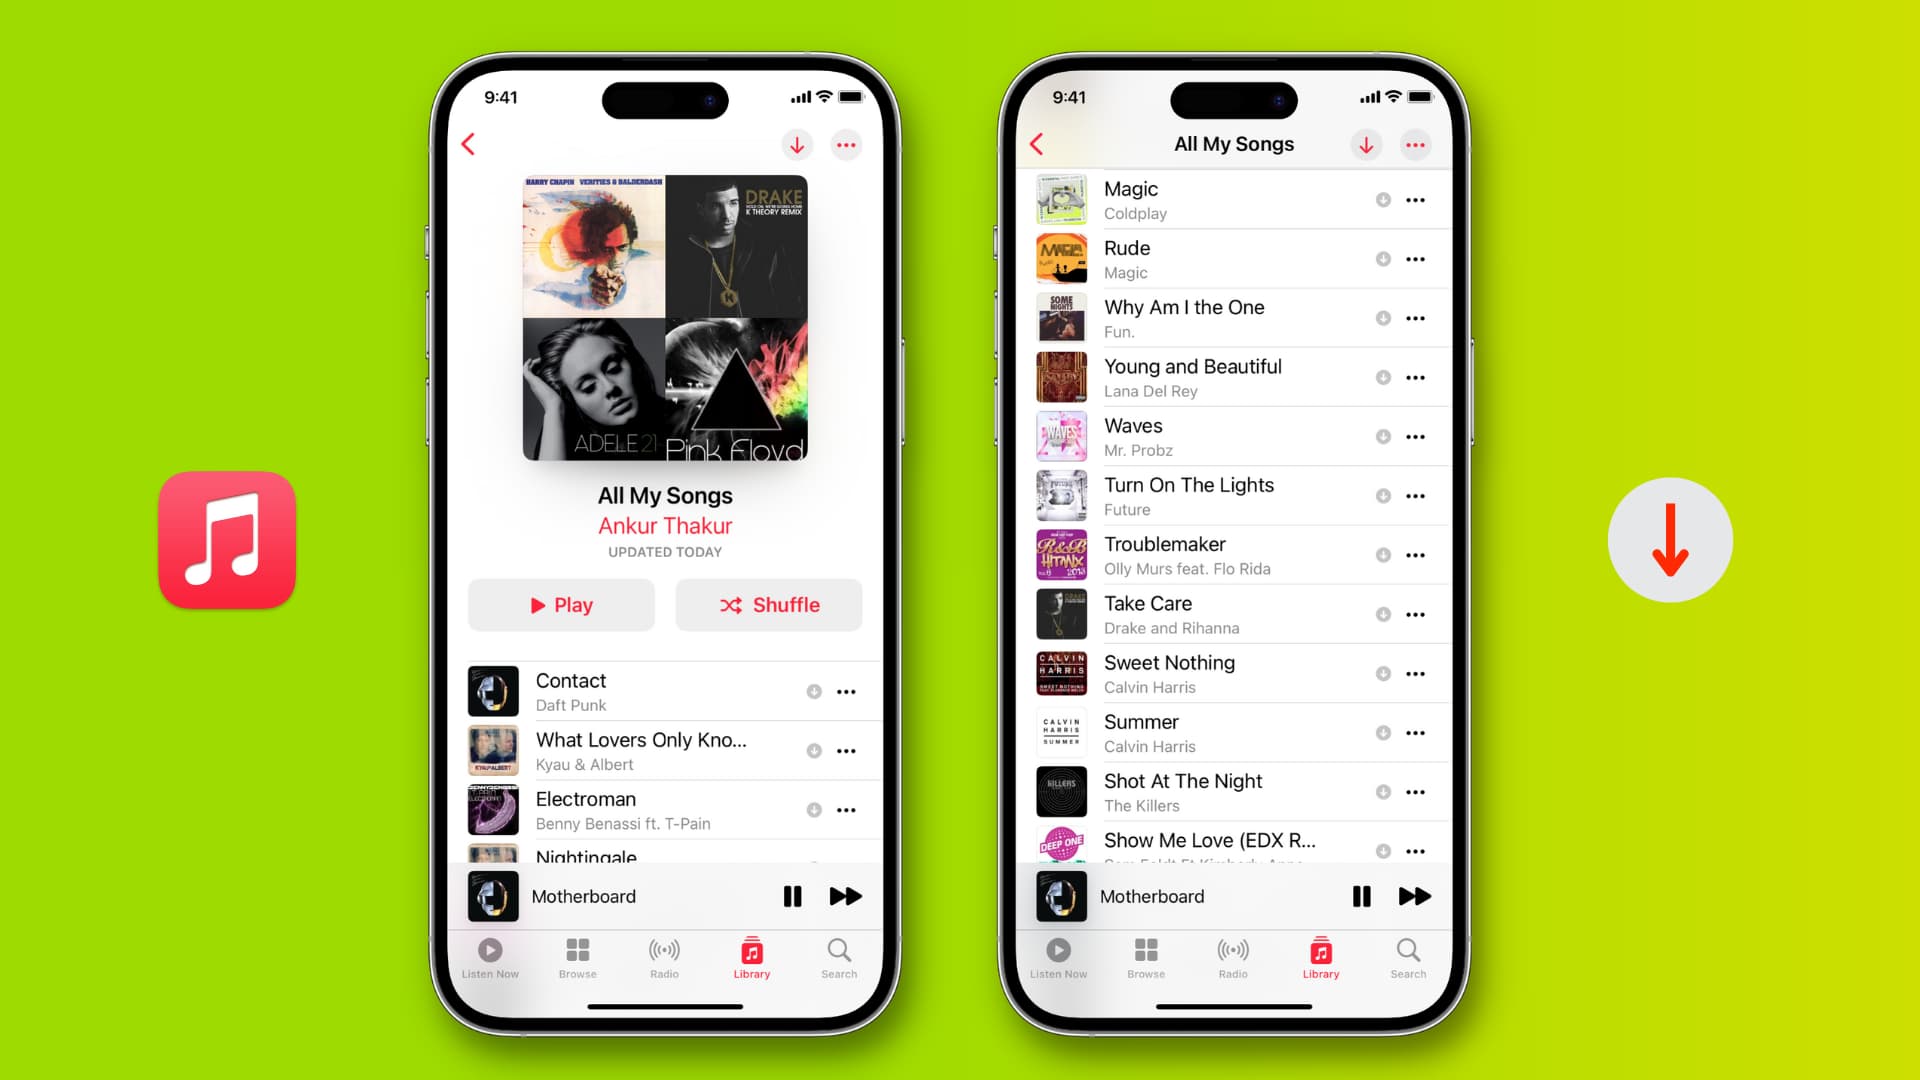 How To Download Music On IPhone From Apple Music